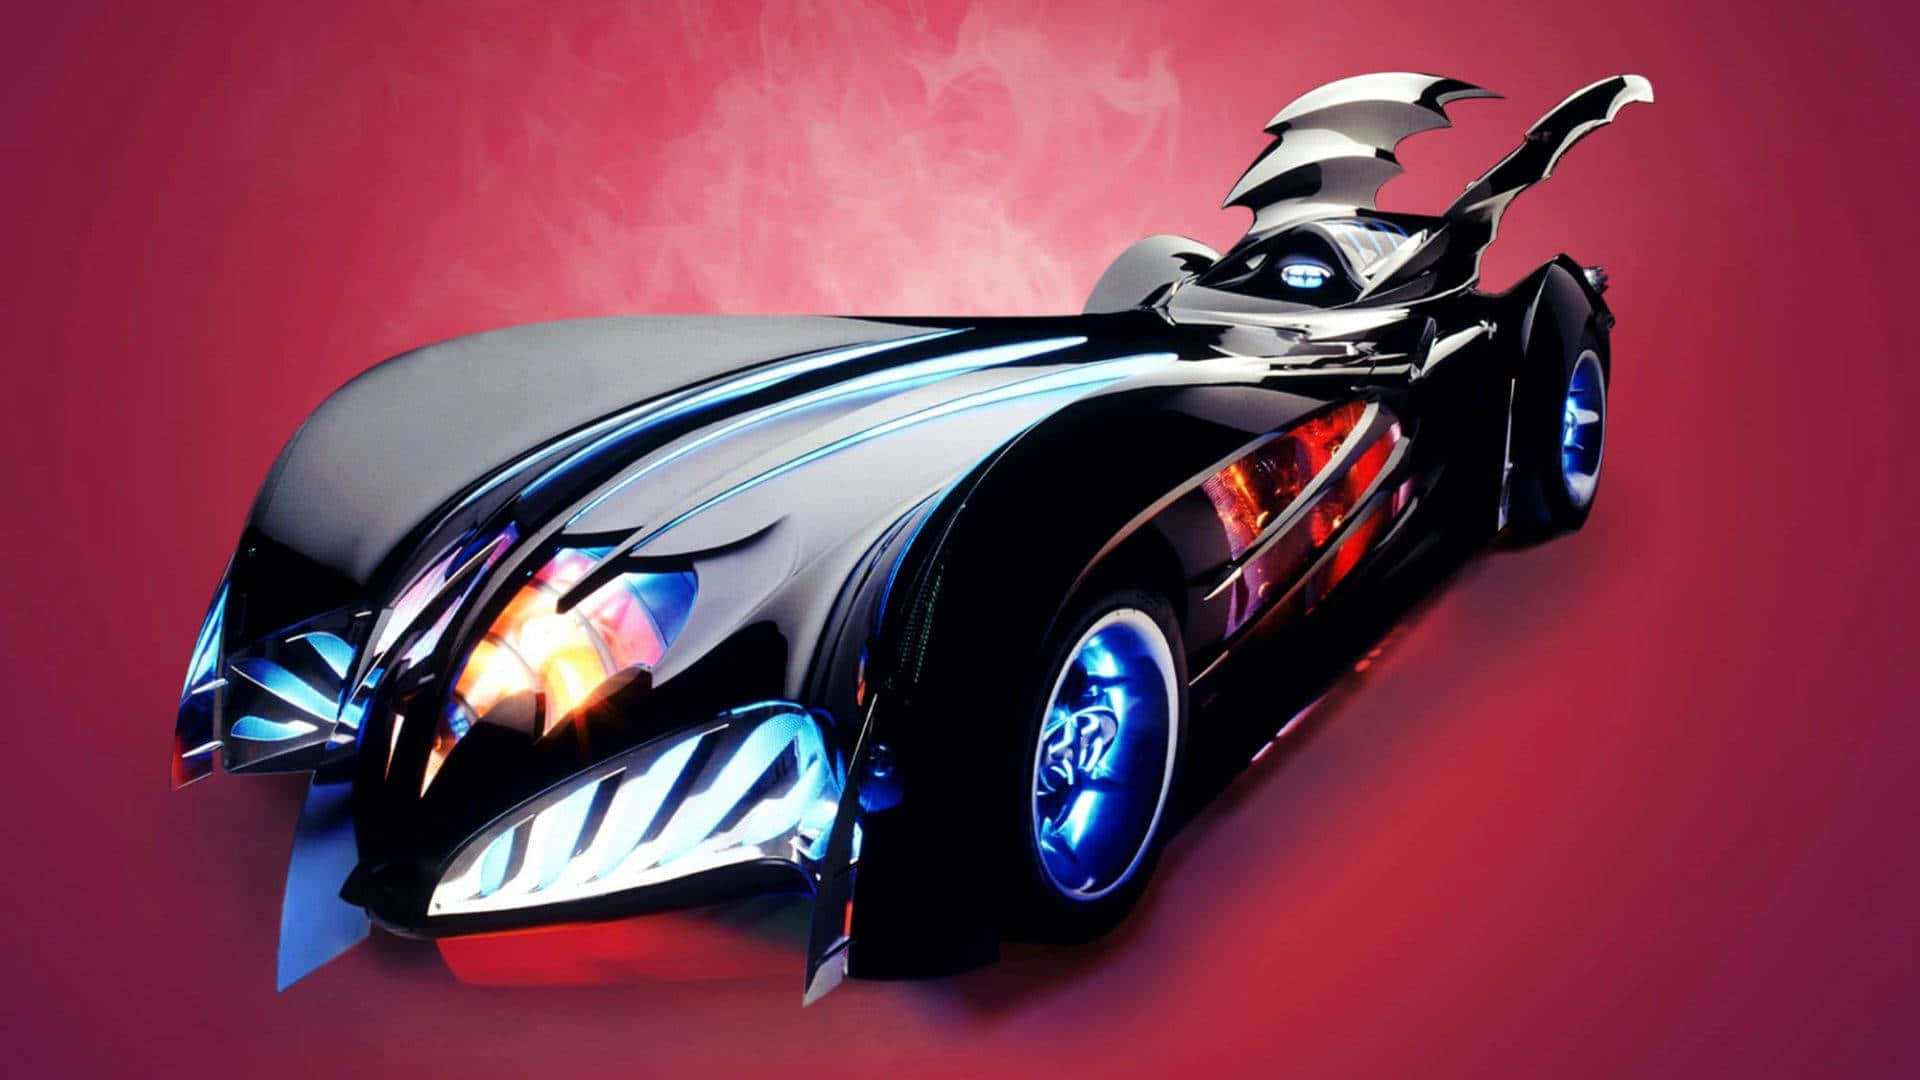 Customize your desktop with the iconic Batmobile Wallpaper